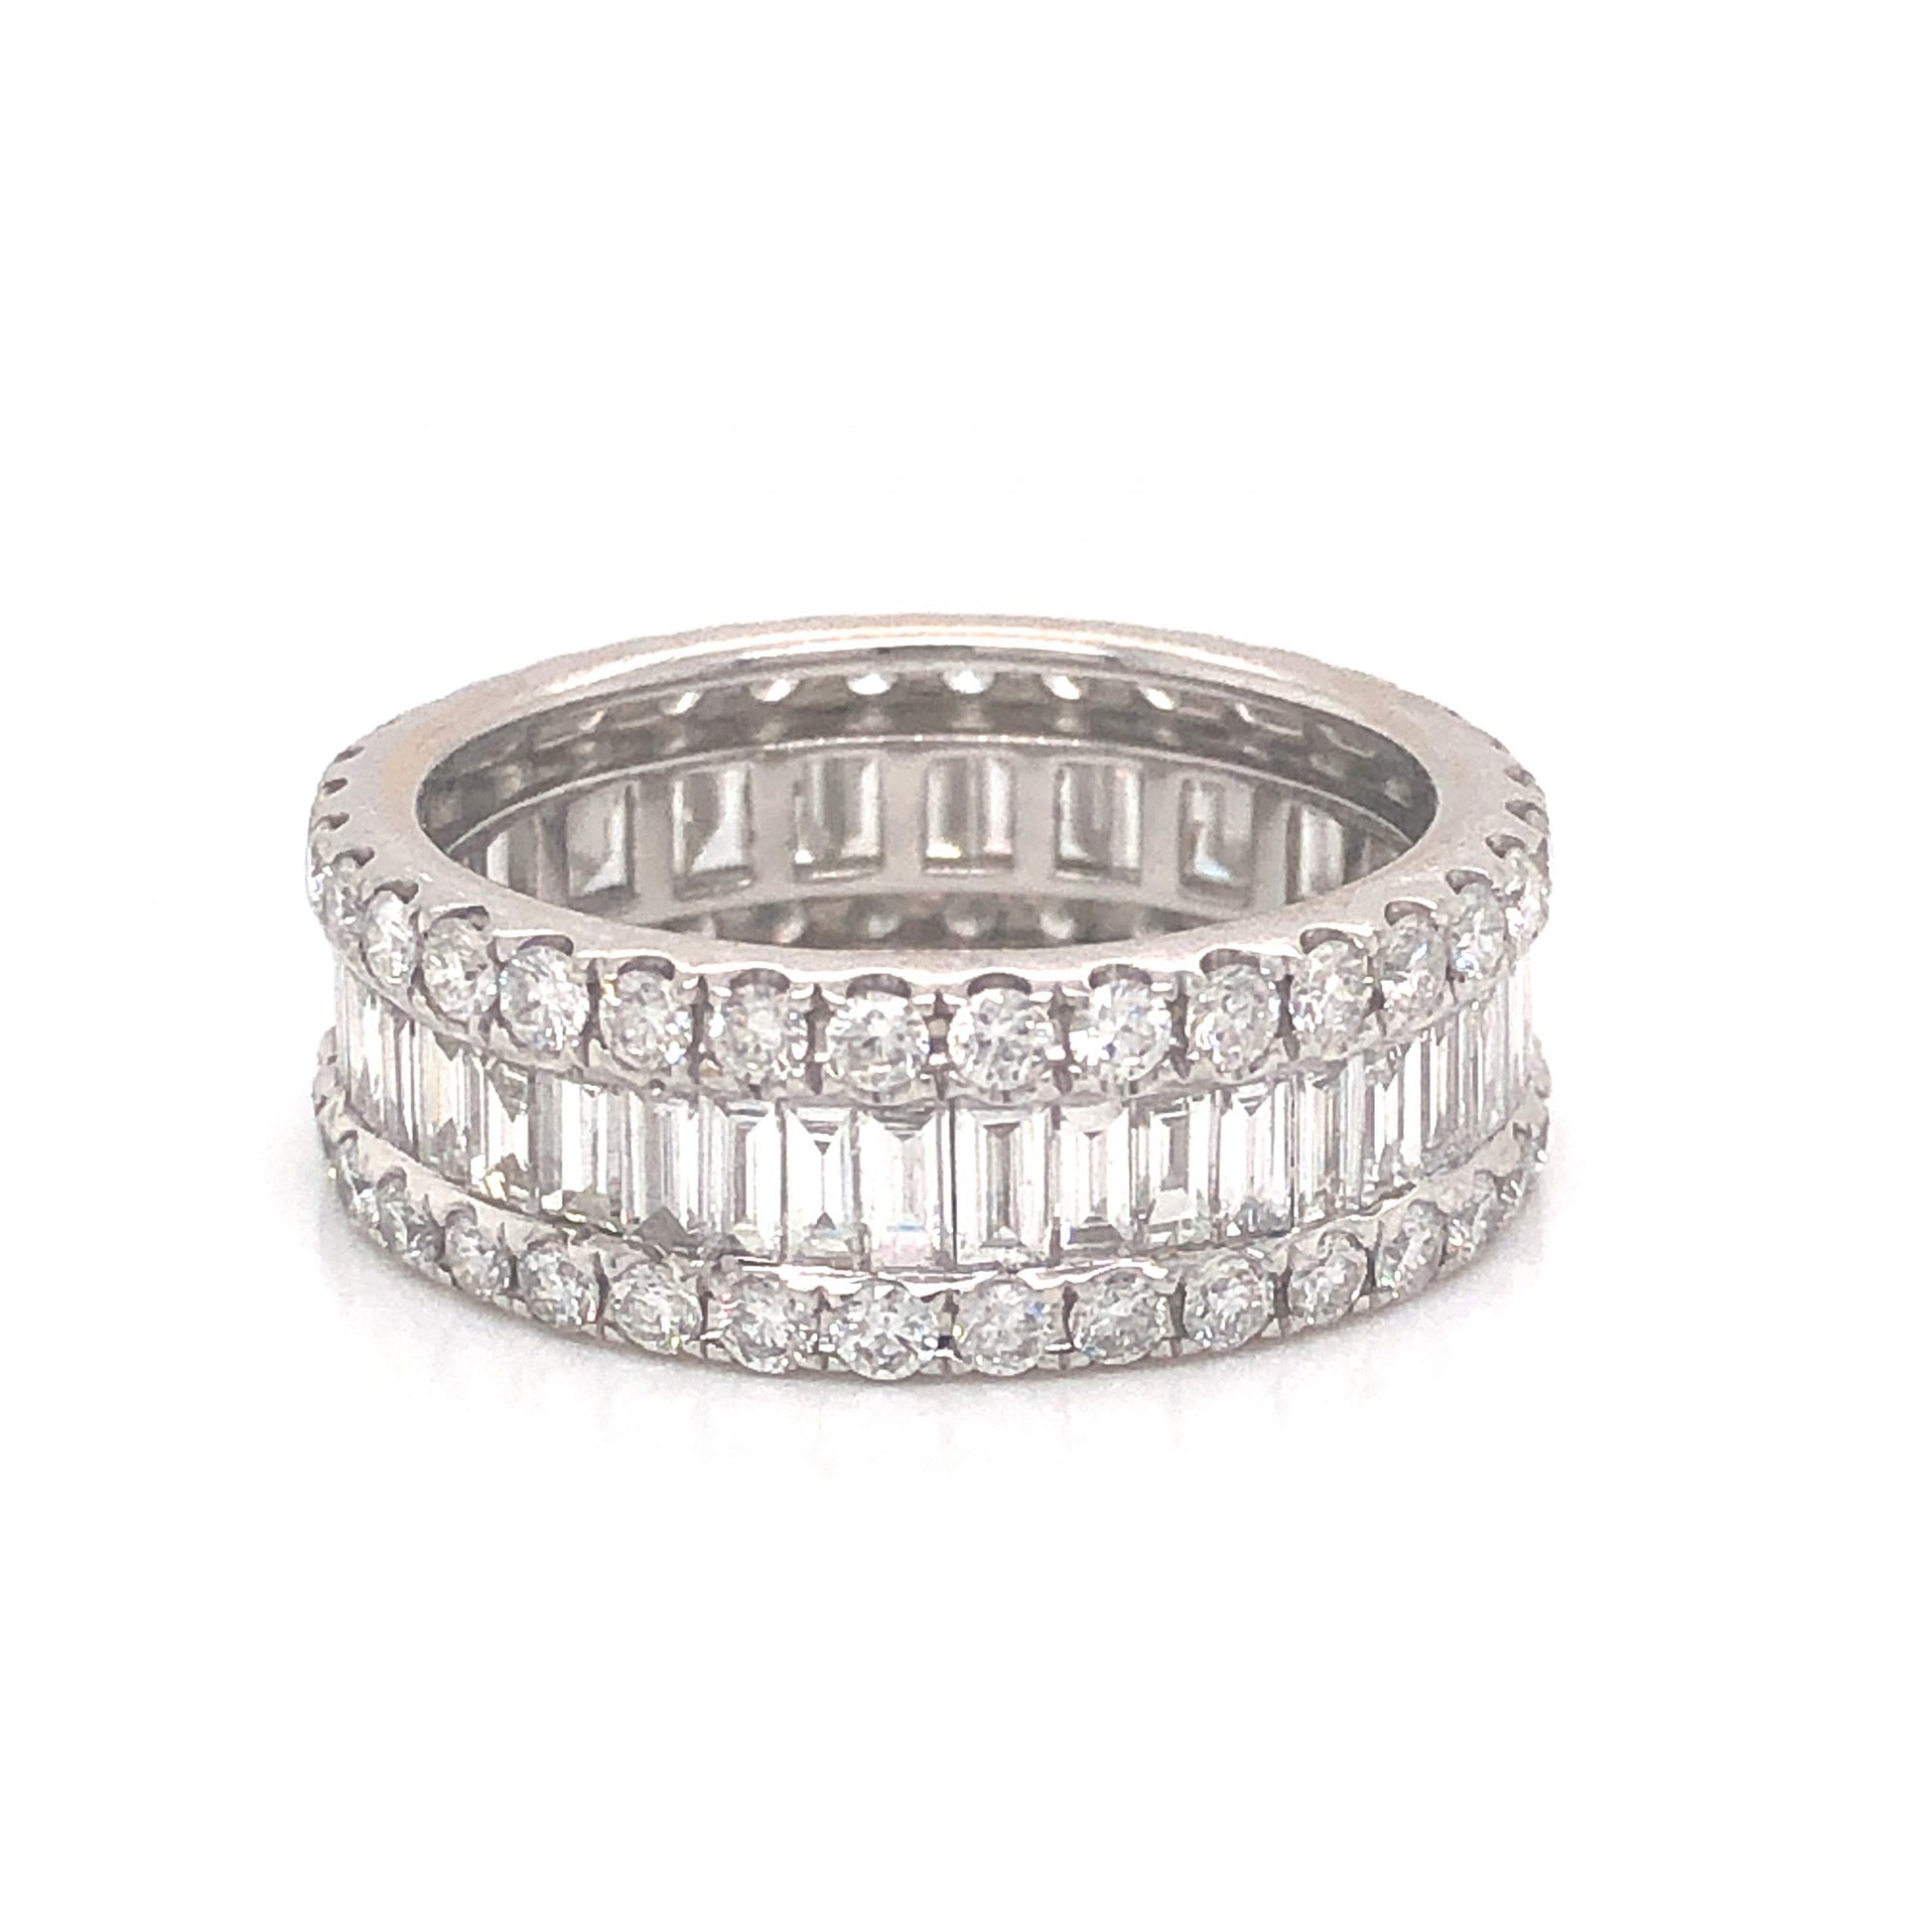 2.65 Baguette & Round Cut Diamond Eternity Band in 18k White GoldComposition: Platinum Ring Size: 6.5 Total Diamond Weight: 2.65ct Total Gram Weight: 4.7 g Inscription: 18K 750 D2.65
      